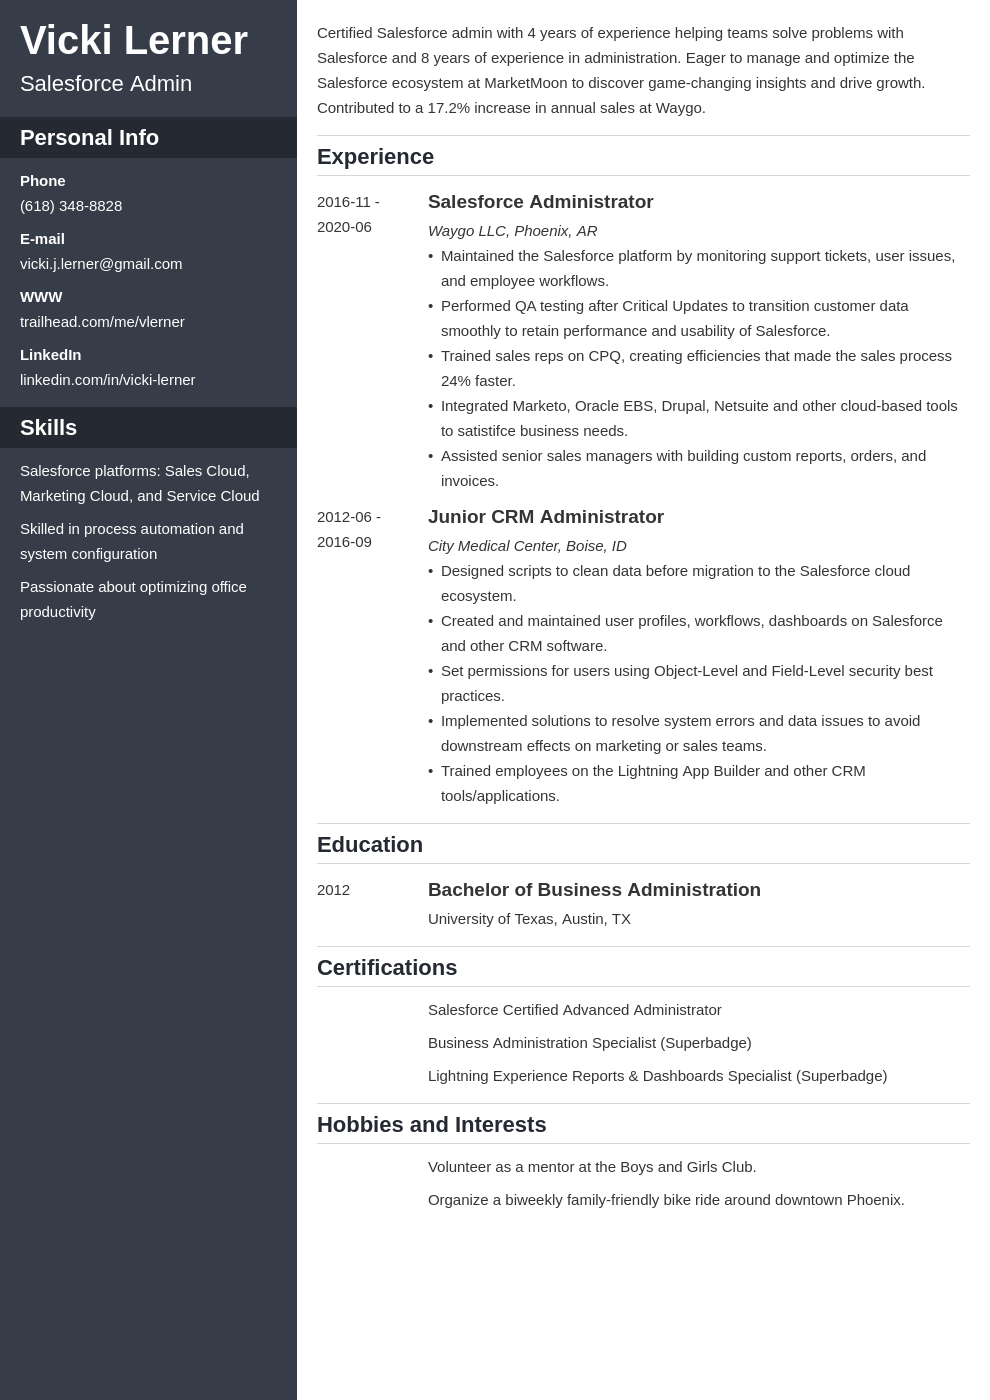 Salesforce Admin Resume Sample and Guide [20+ Tips]